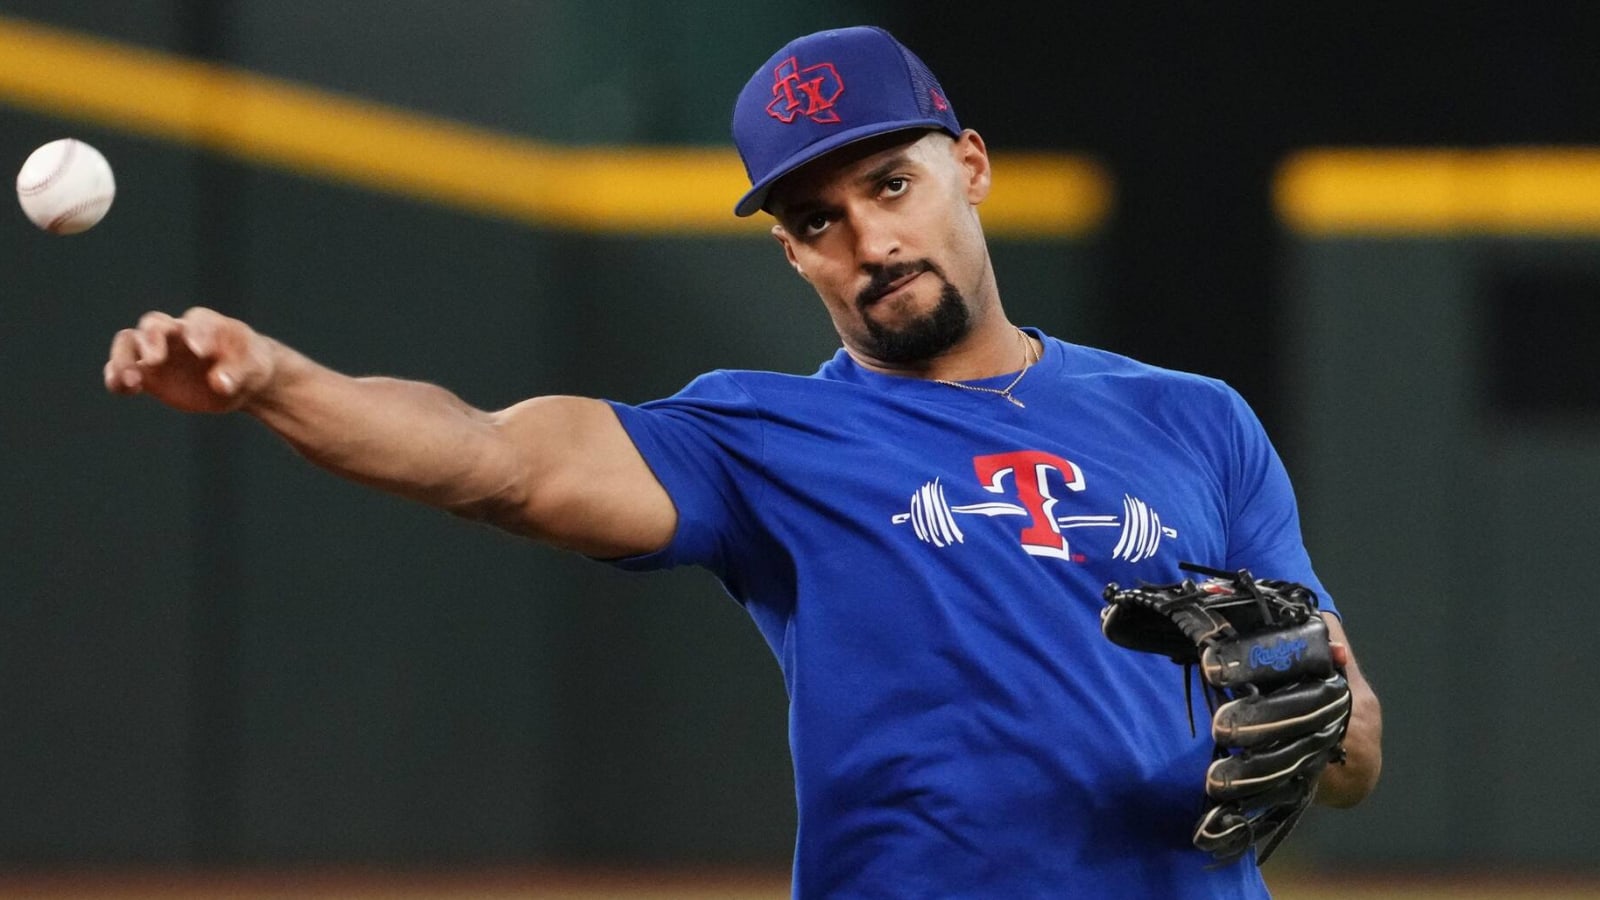 This Rangers player will be key to World Series success despite struggles